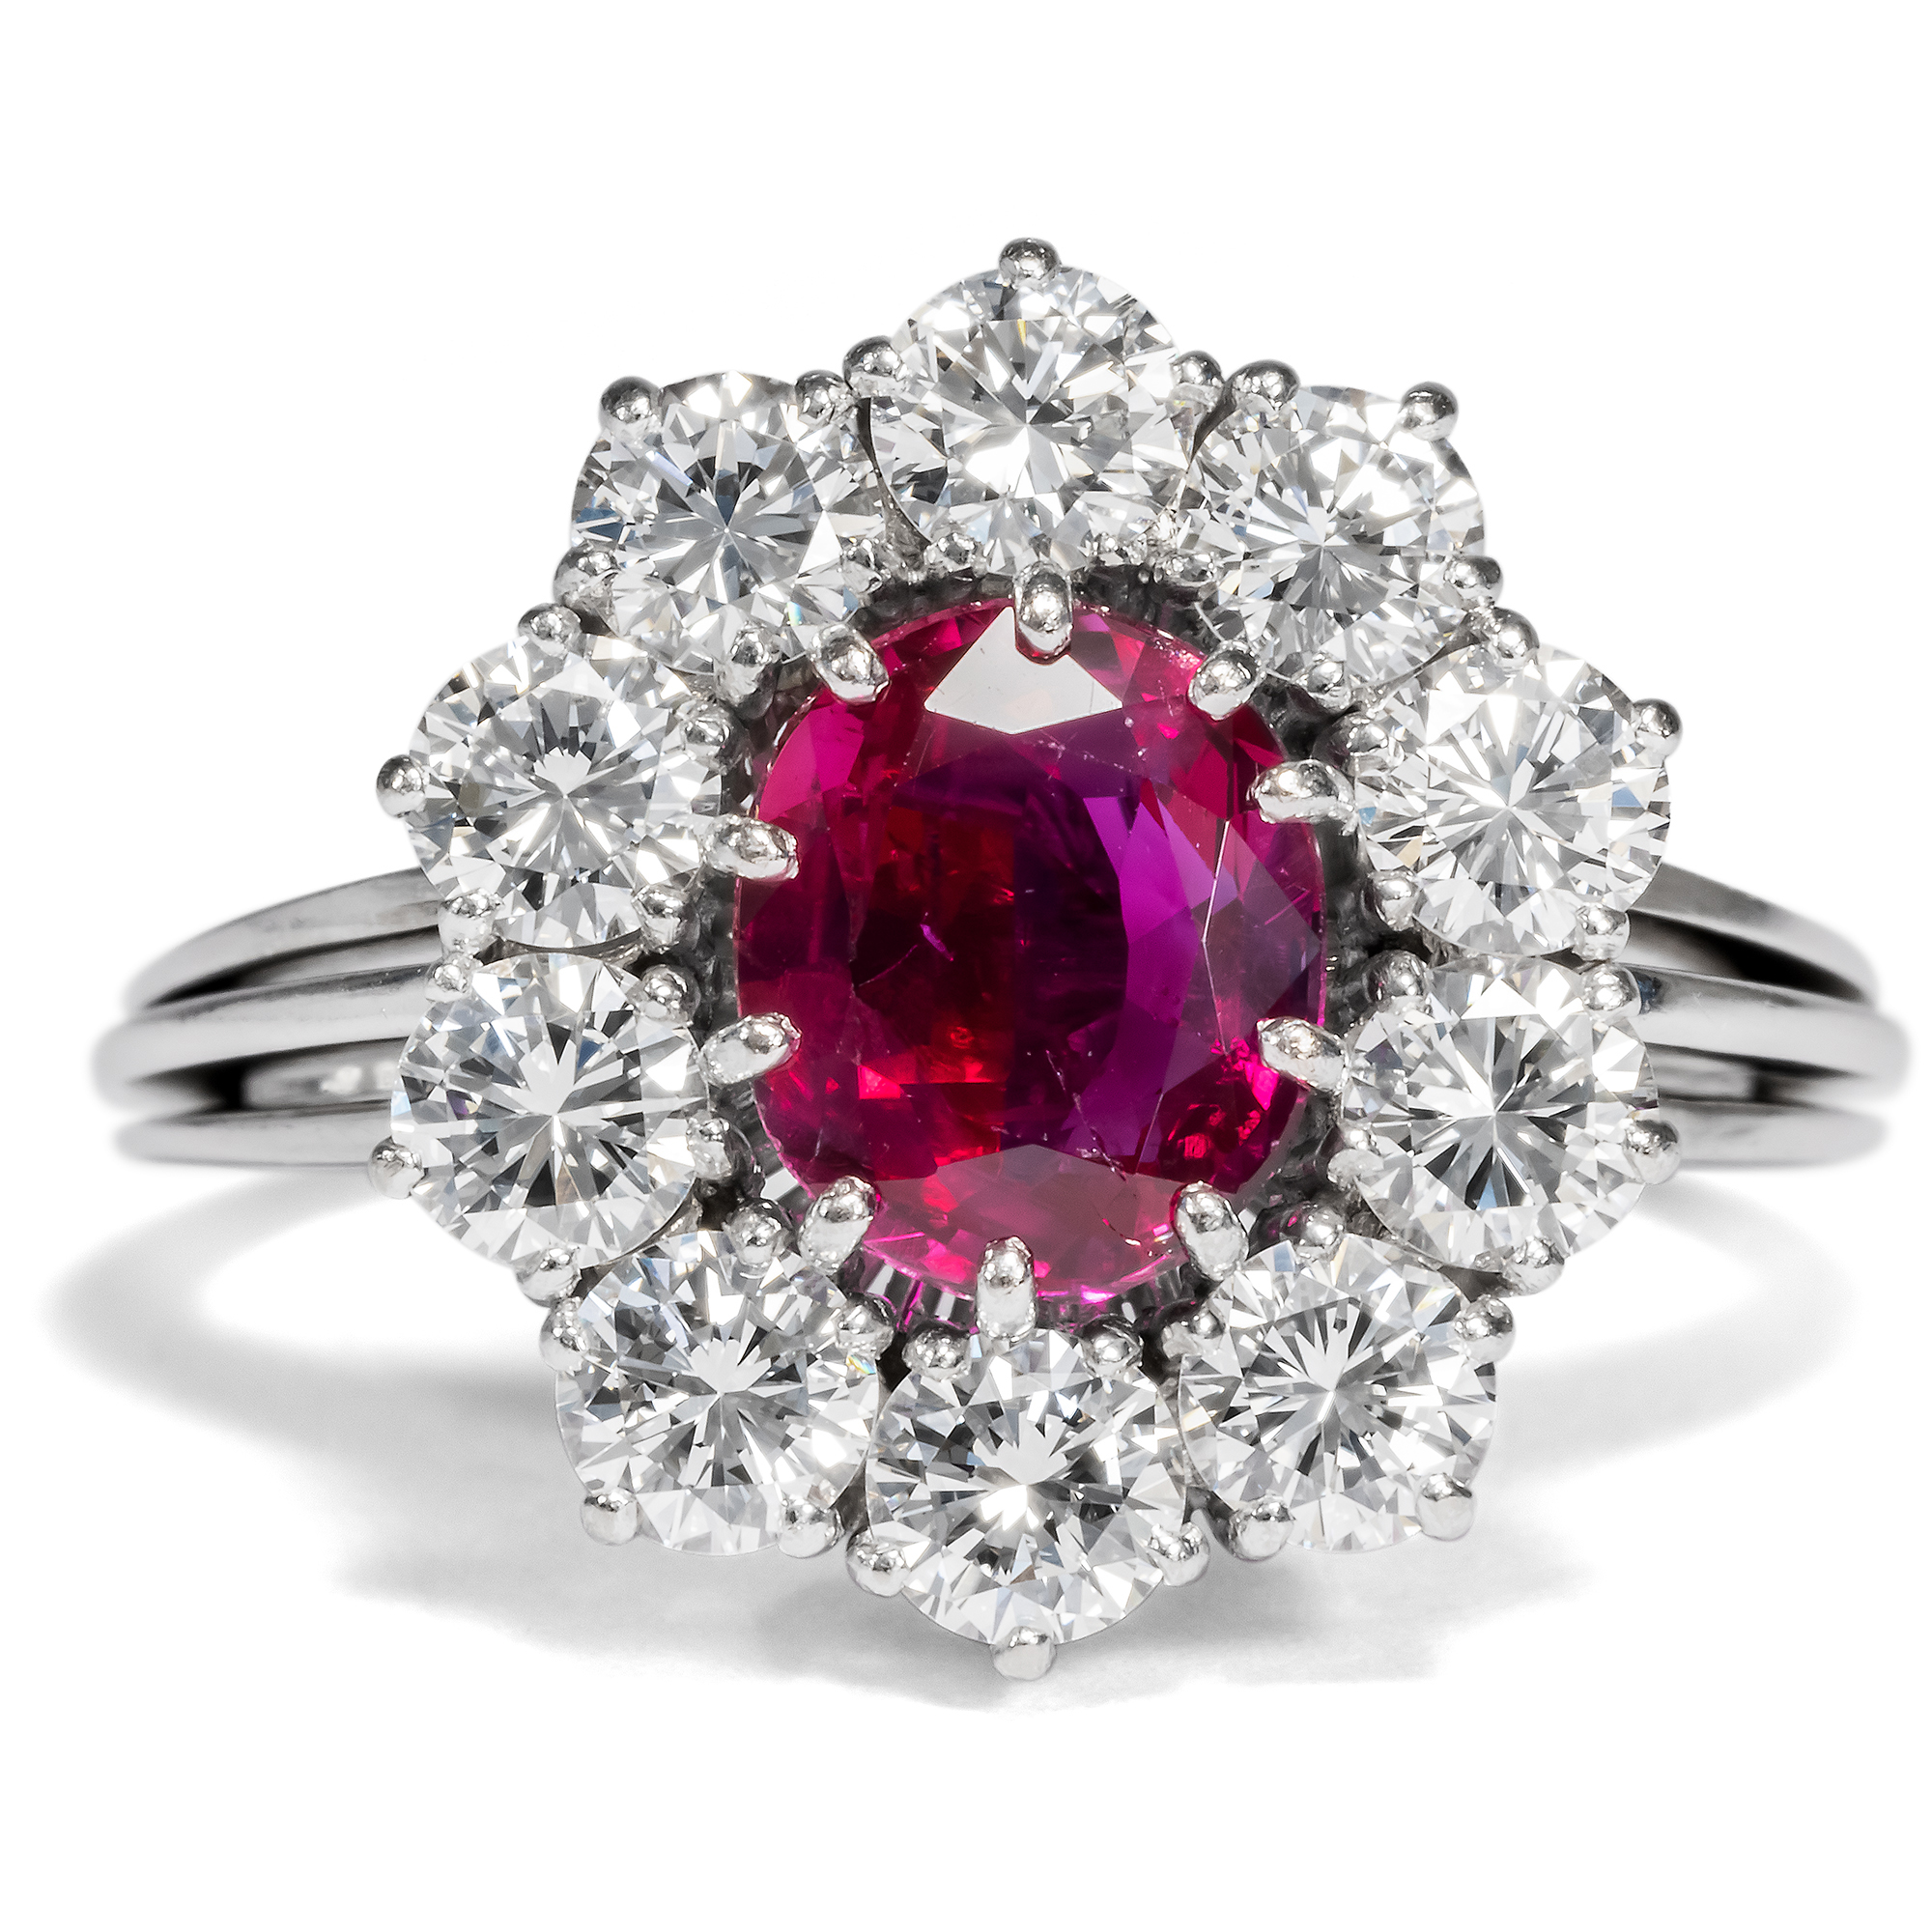 Vintage Cluster Ring with Untreated Burmese Ruby & Diamonds, circa 1975